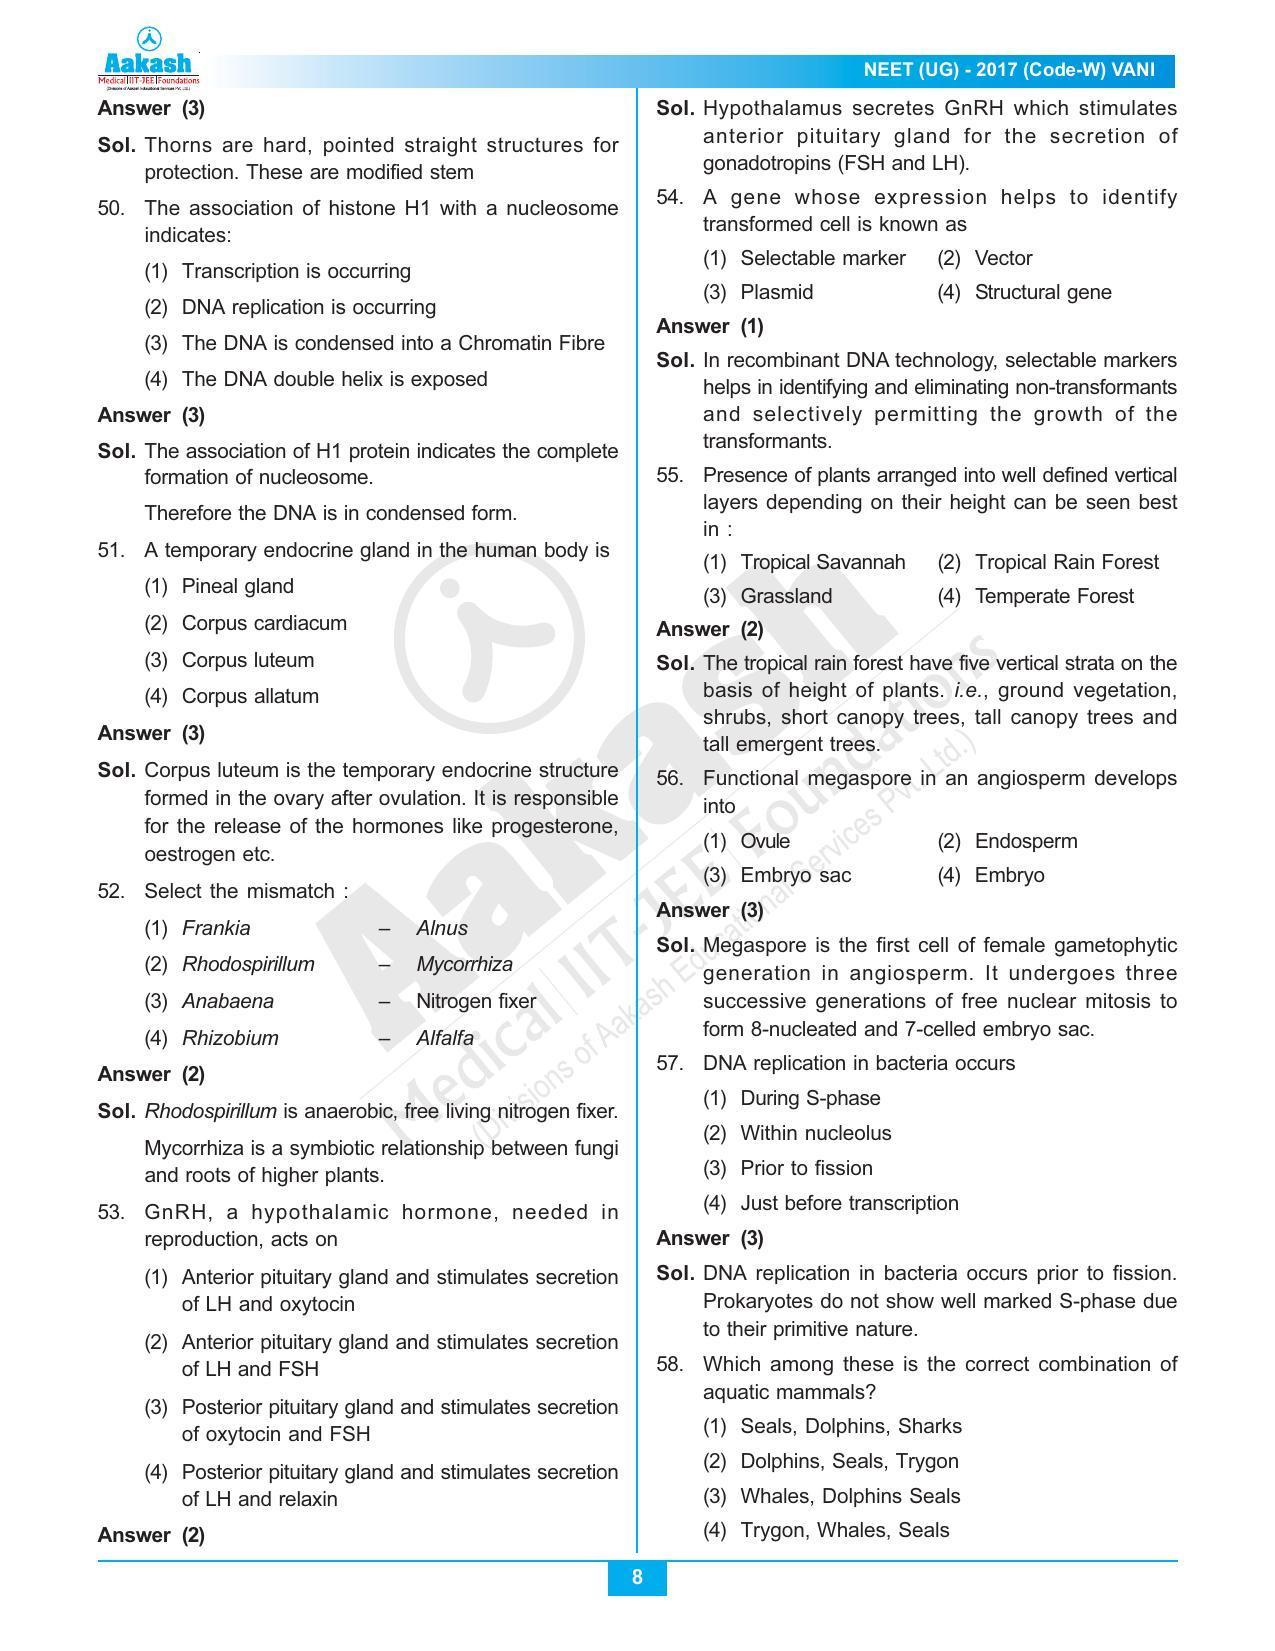  NEET Code W 2017 Answer & Solutions - Page 8